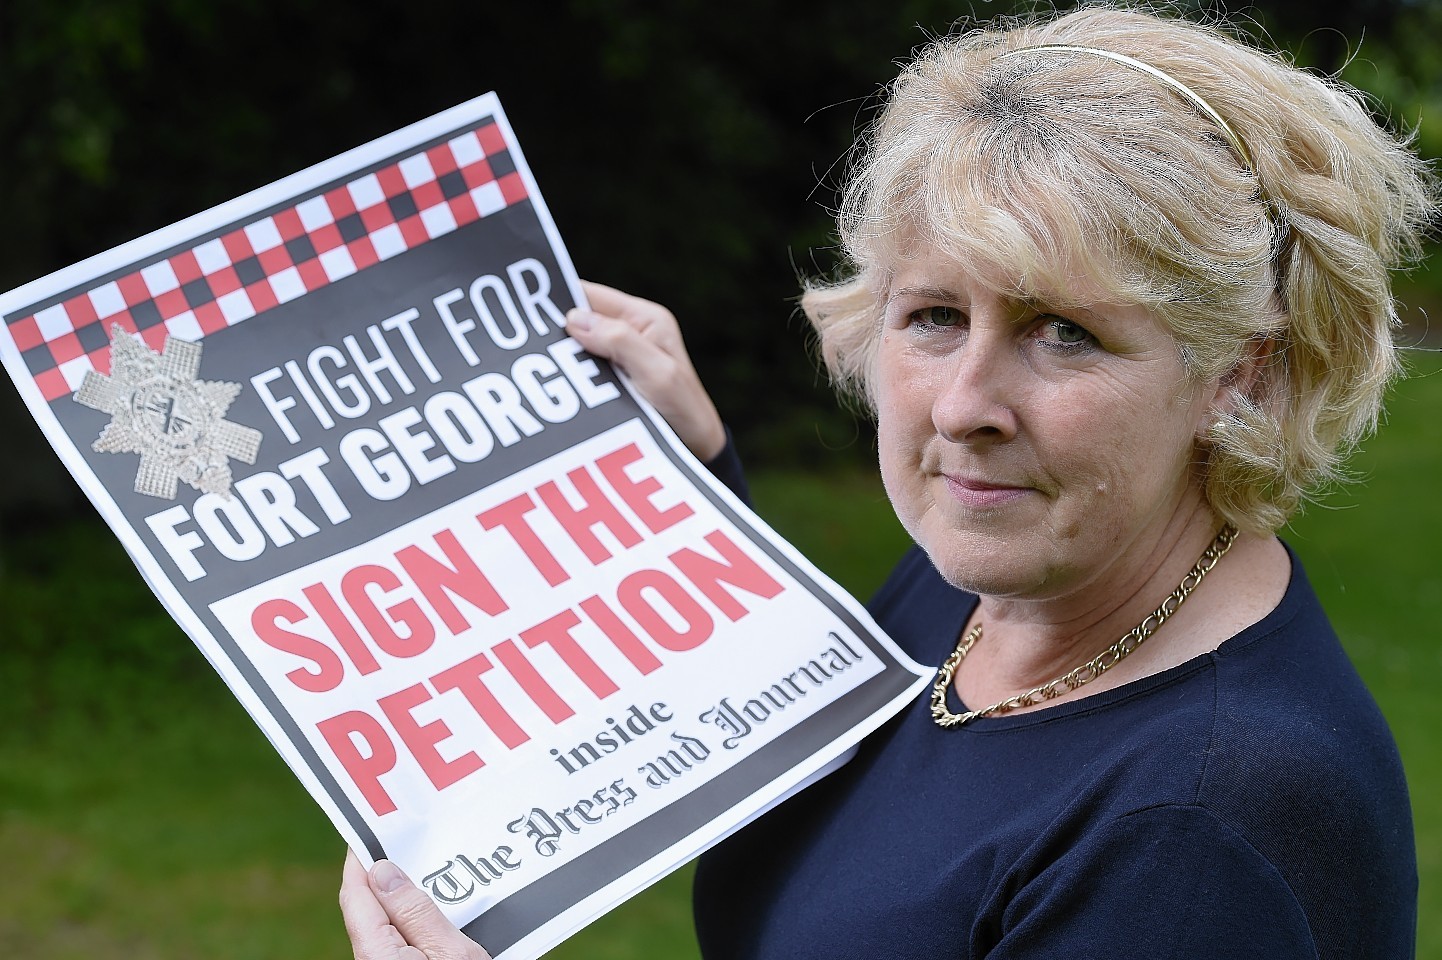 Highland councillor and retired Army major Caroline Caddick has joined the Fight For Fort George.